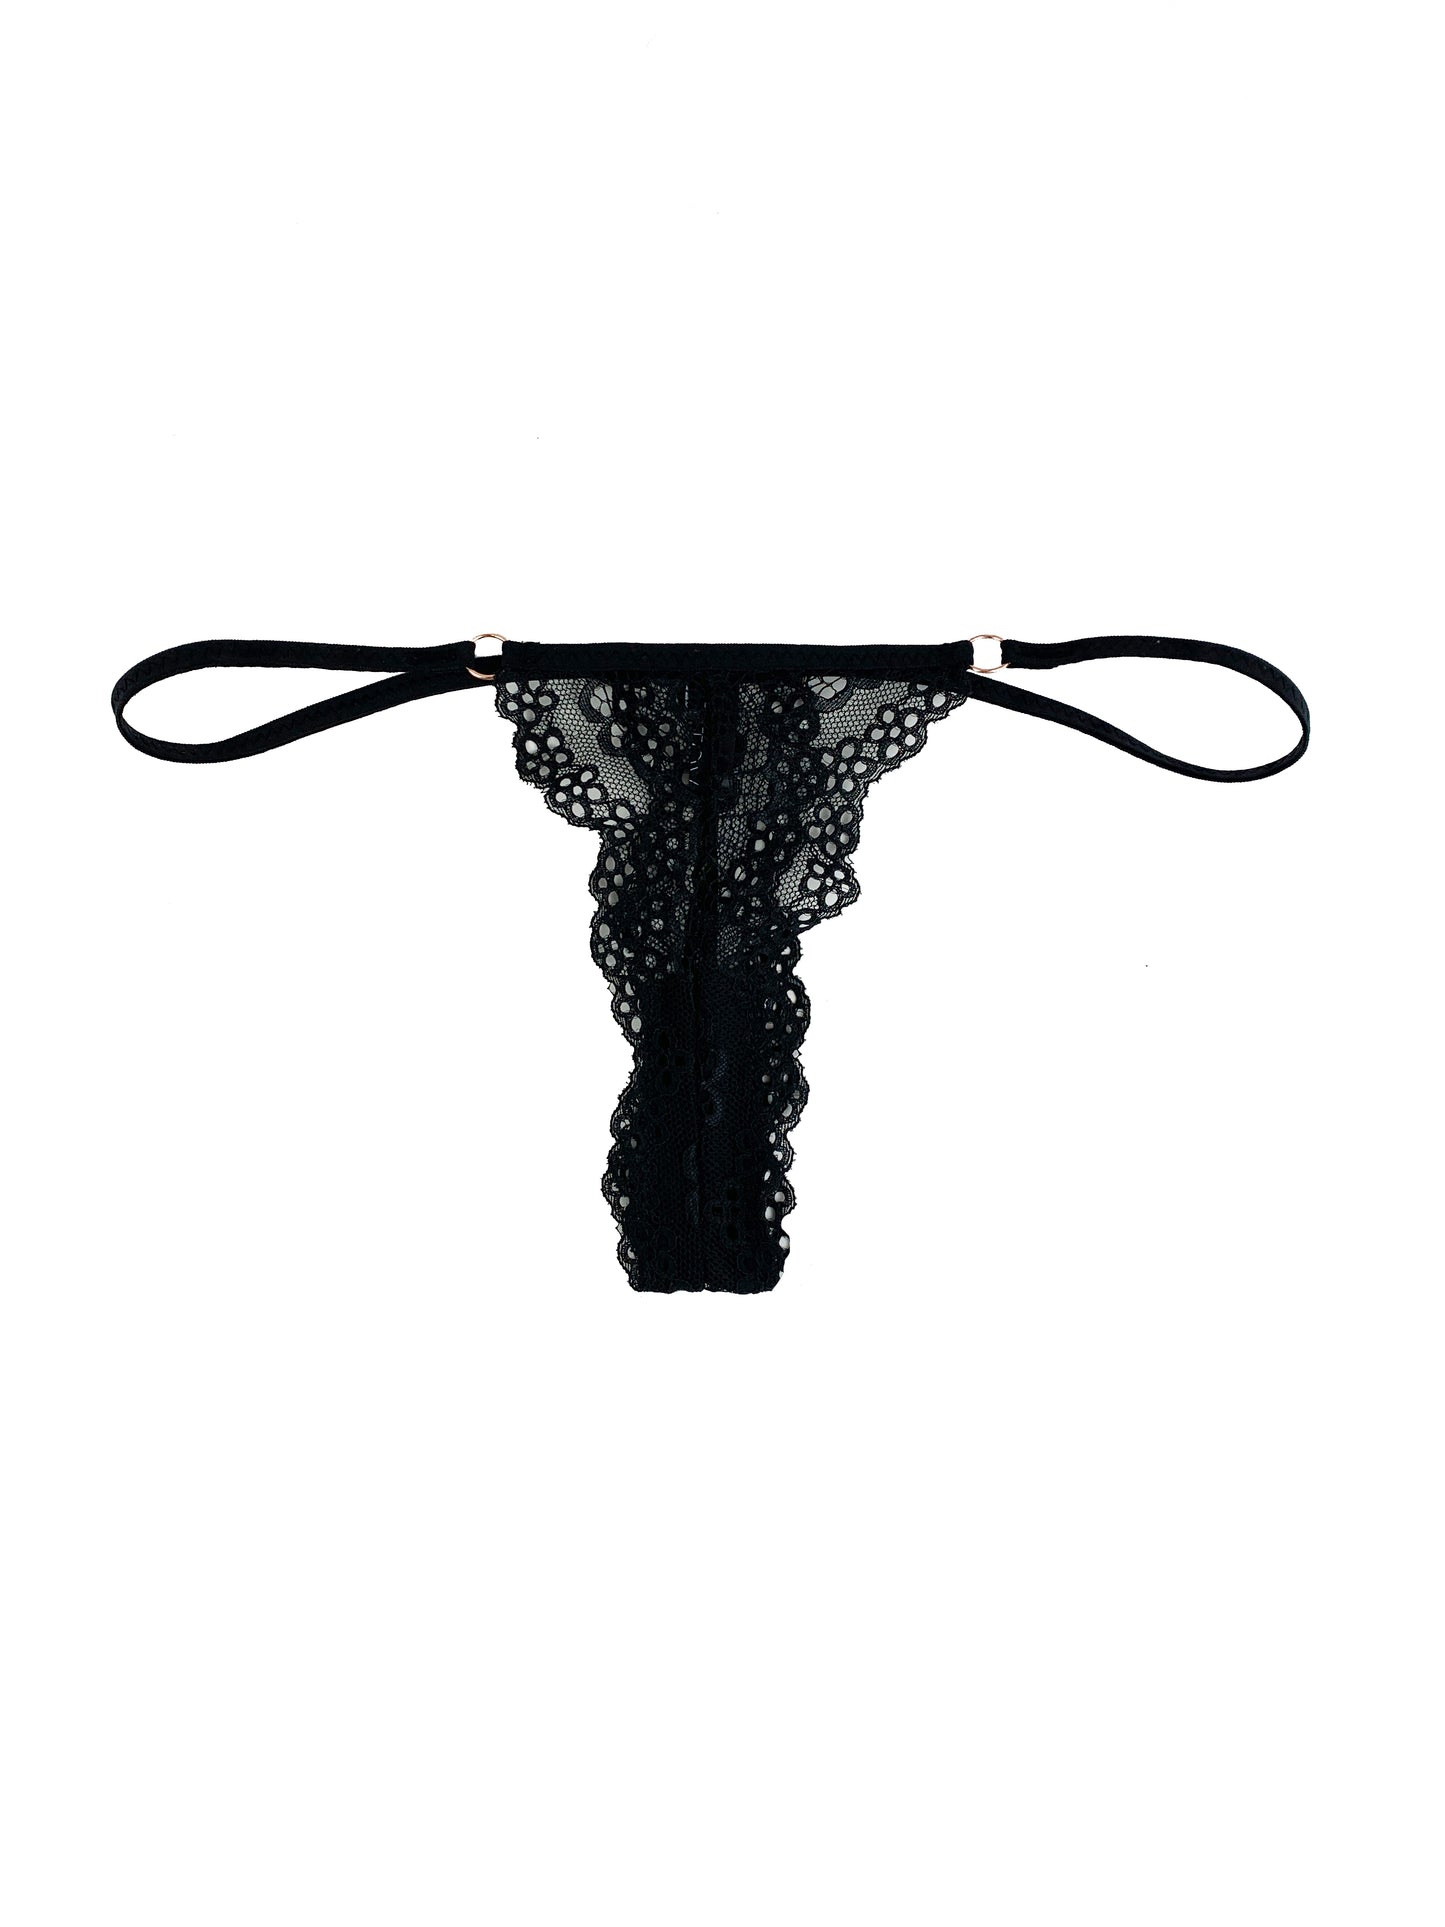 Delicate lace black string thong